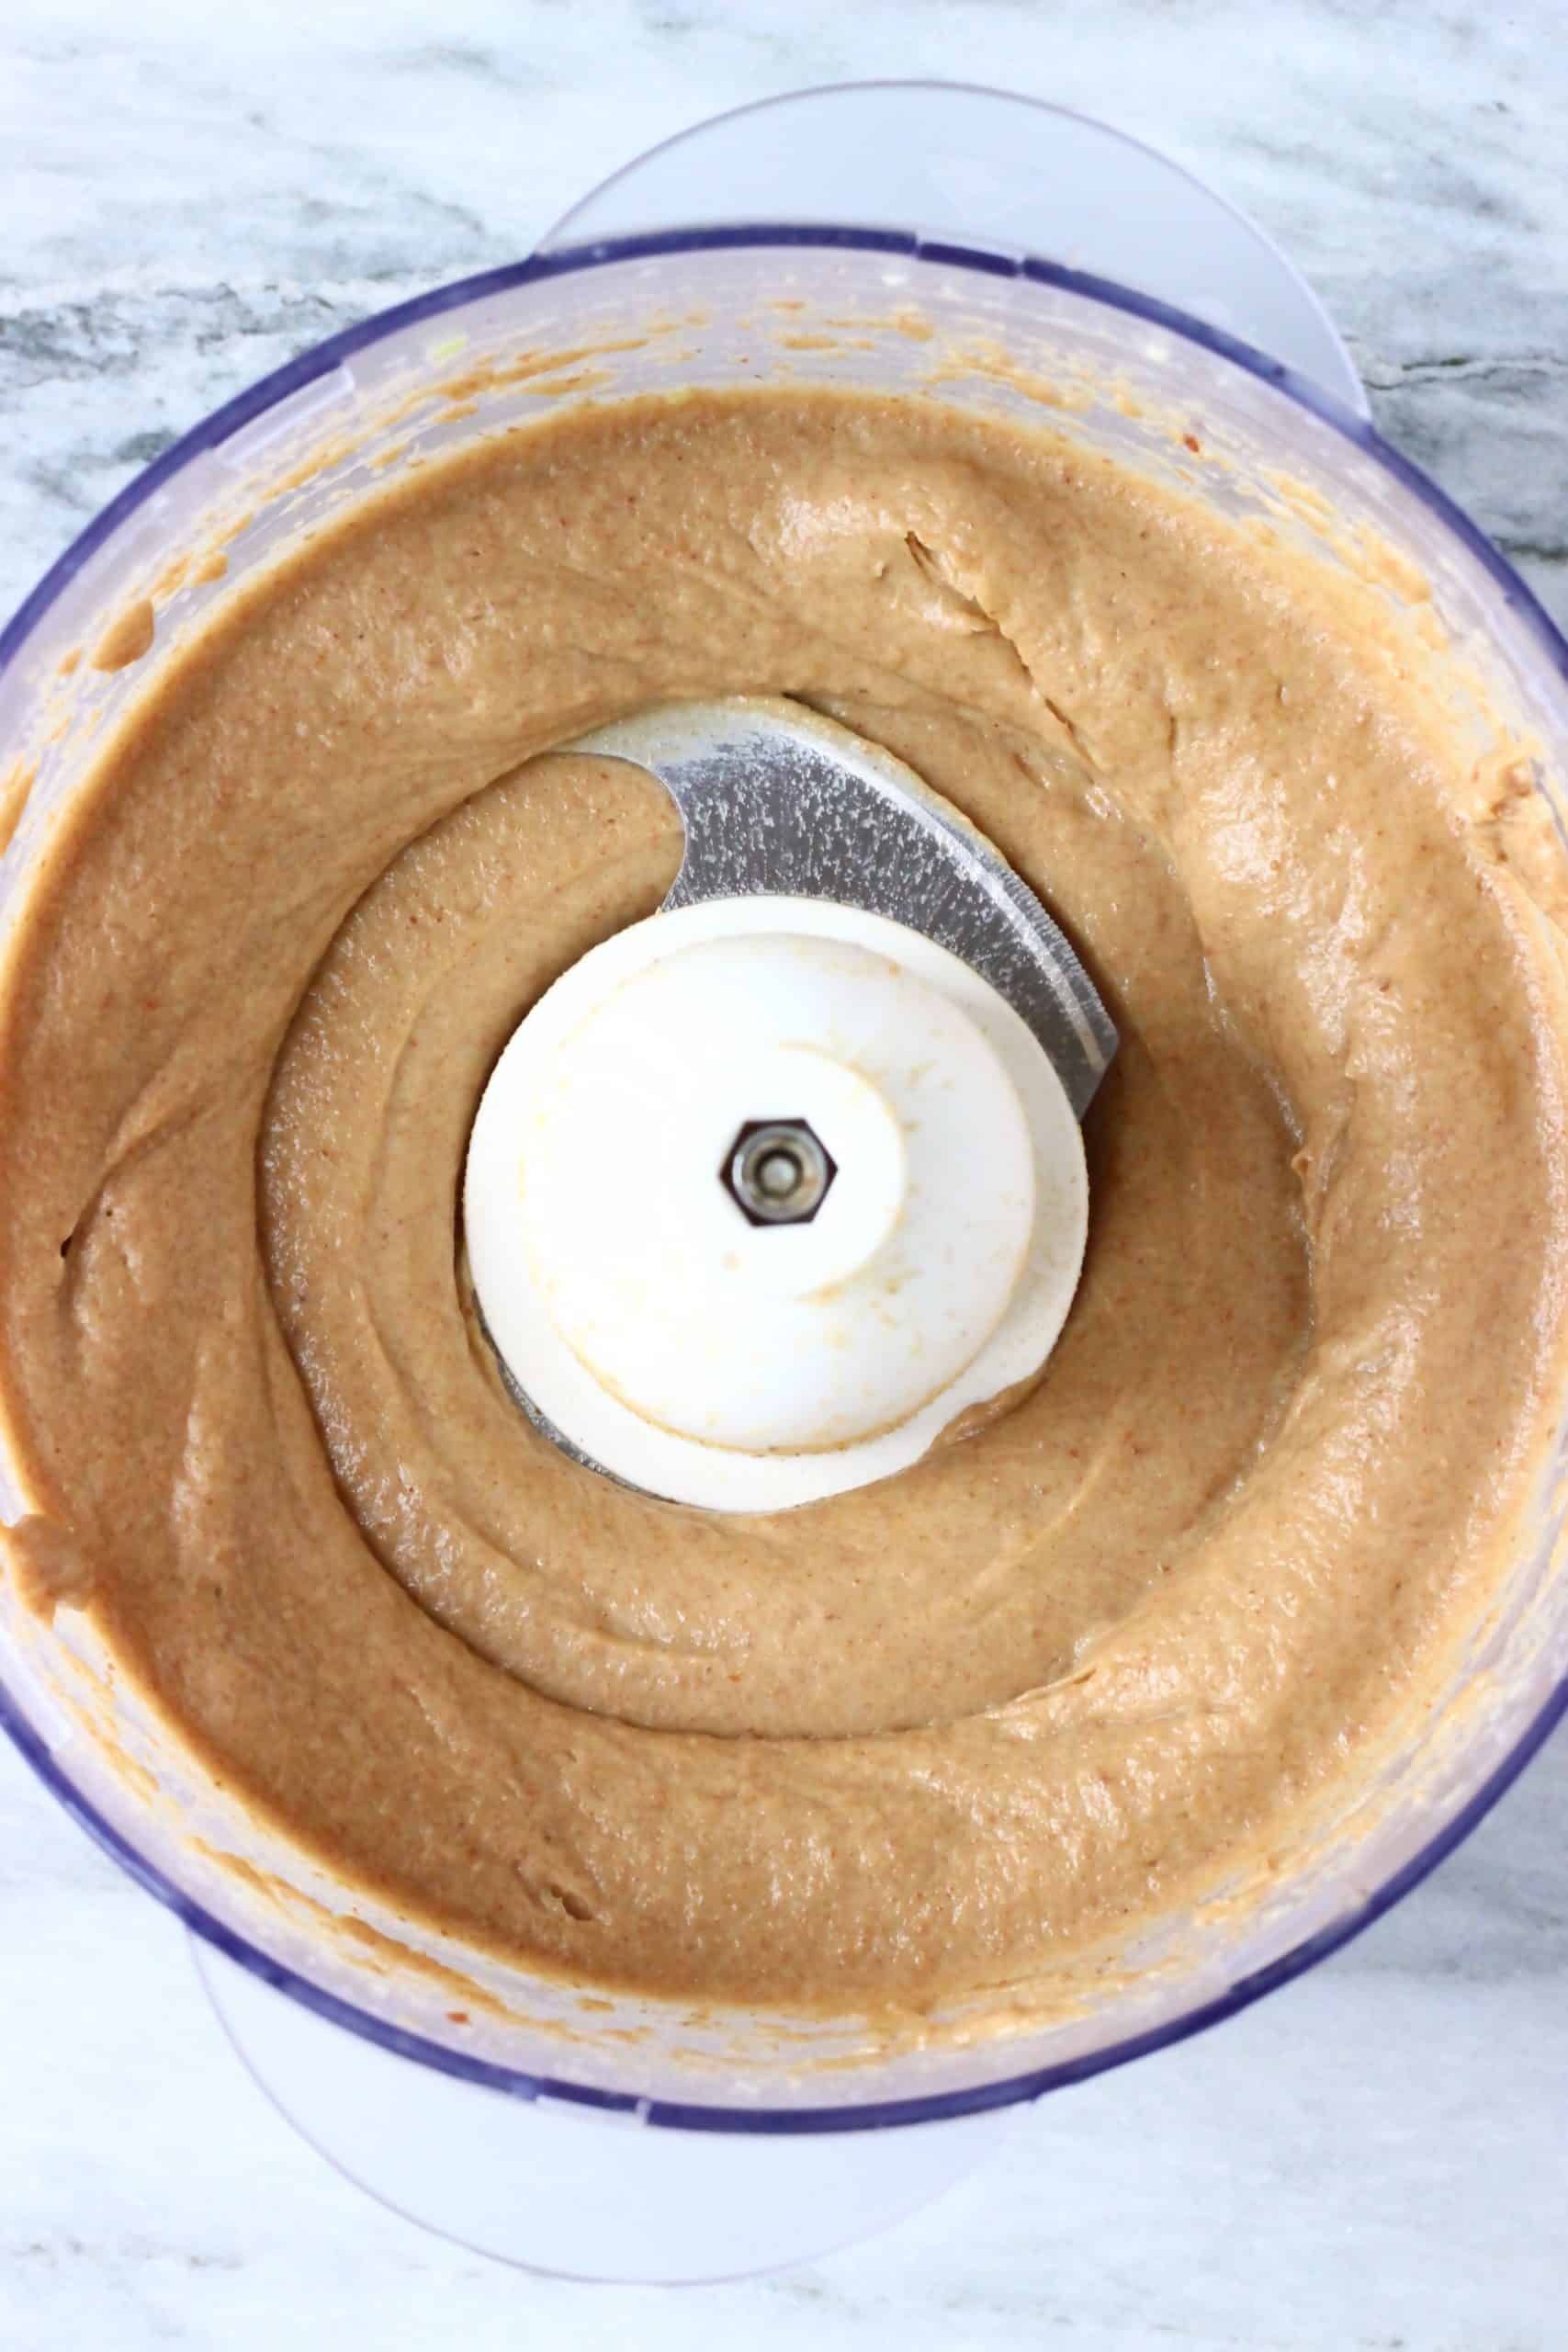 Blended avocado, dates, almond butter and almond milk in a food processor